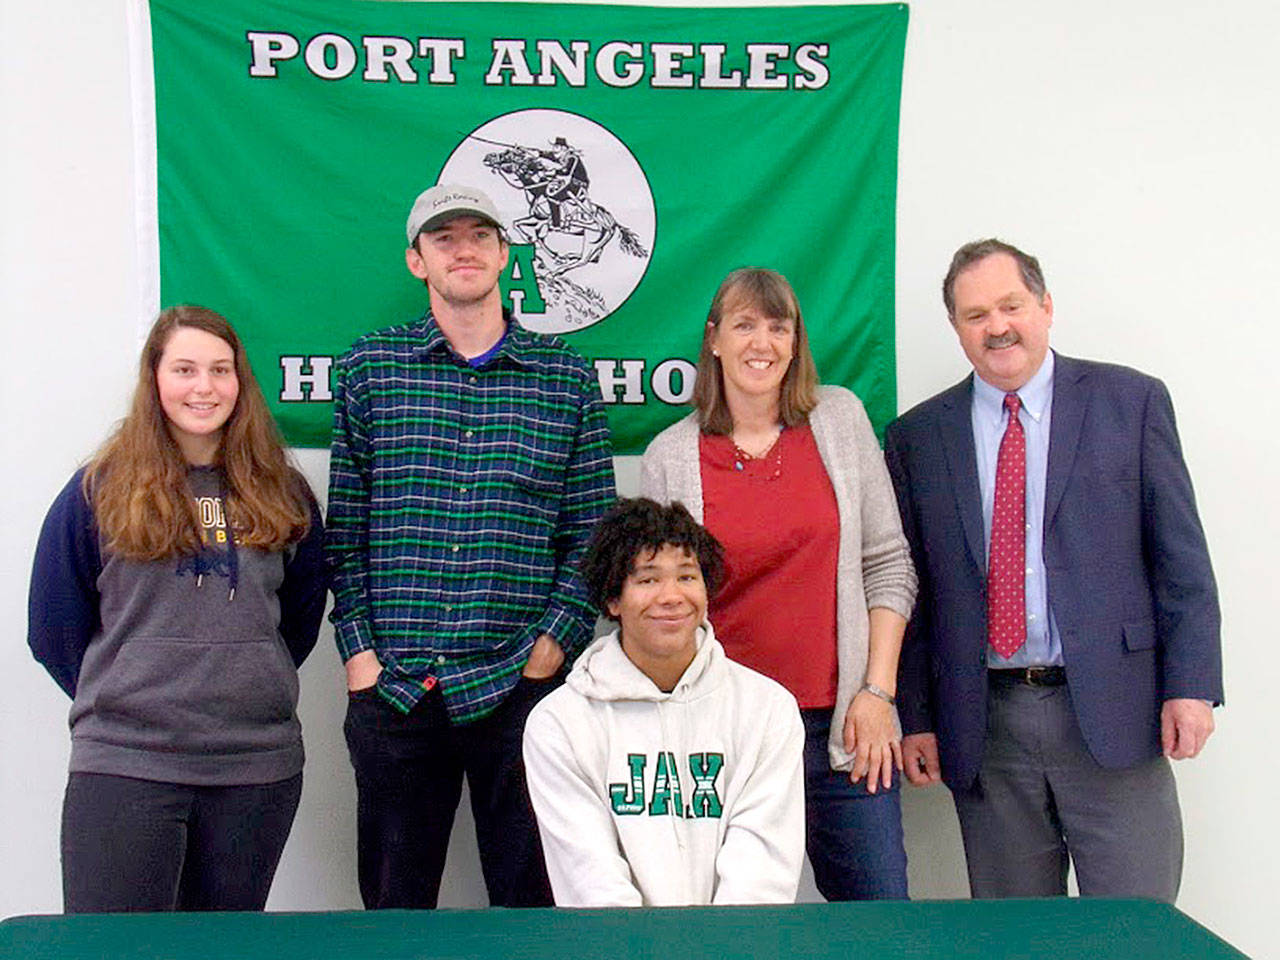 Olympic Peninsula Rowing Association rower Nathan Mishler, seated, signed this week to row for Jacksonville University in Florida. Joining him at his signing ceremony on Monday were, from left, OPRA coaches Maria England, Calum Swinford, Debby Swinford and OPRA board president Scott Kennedy.